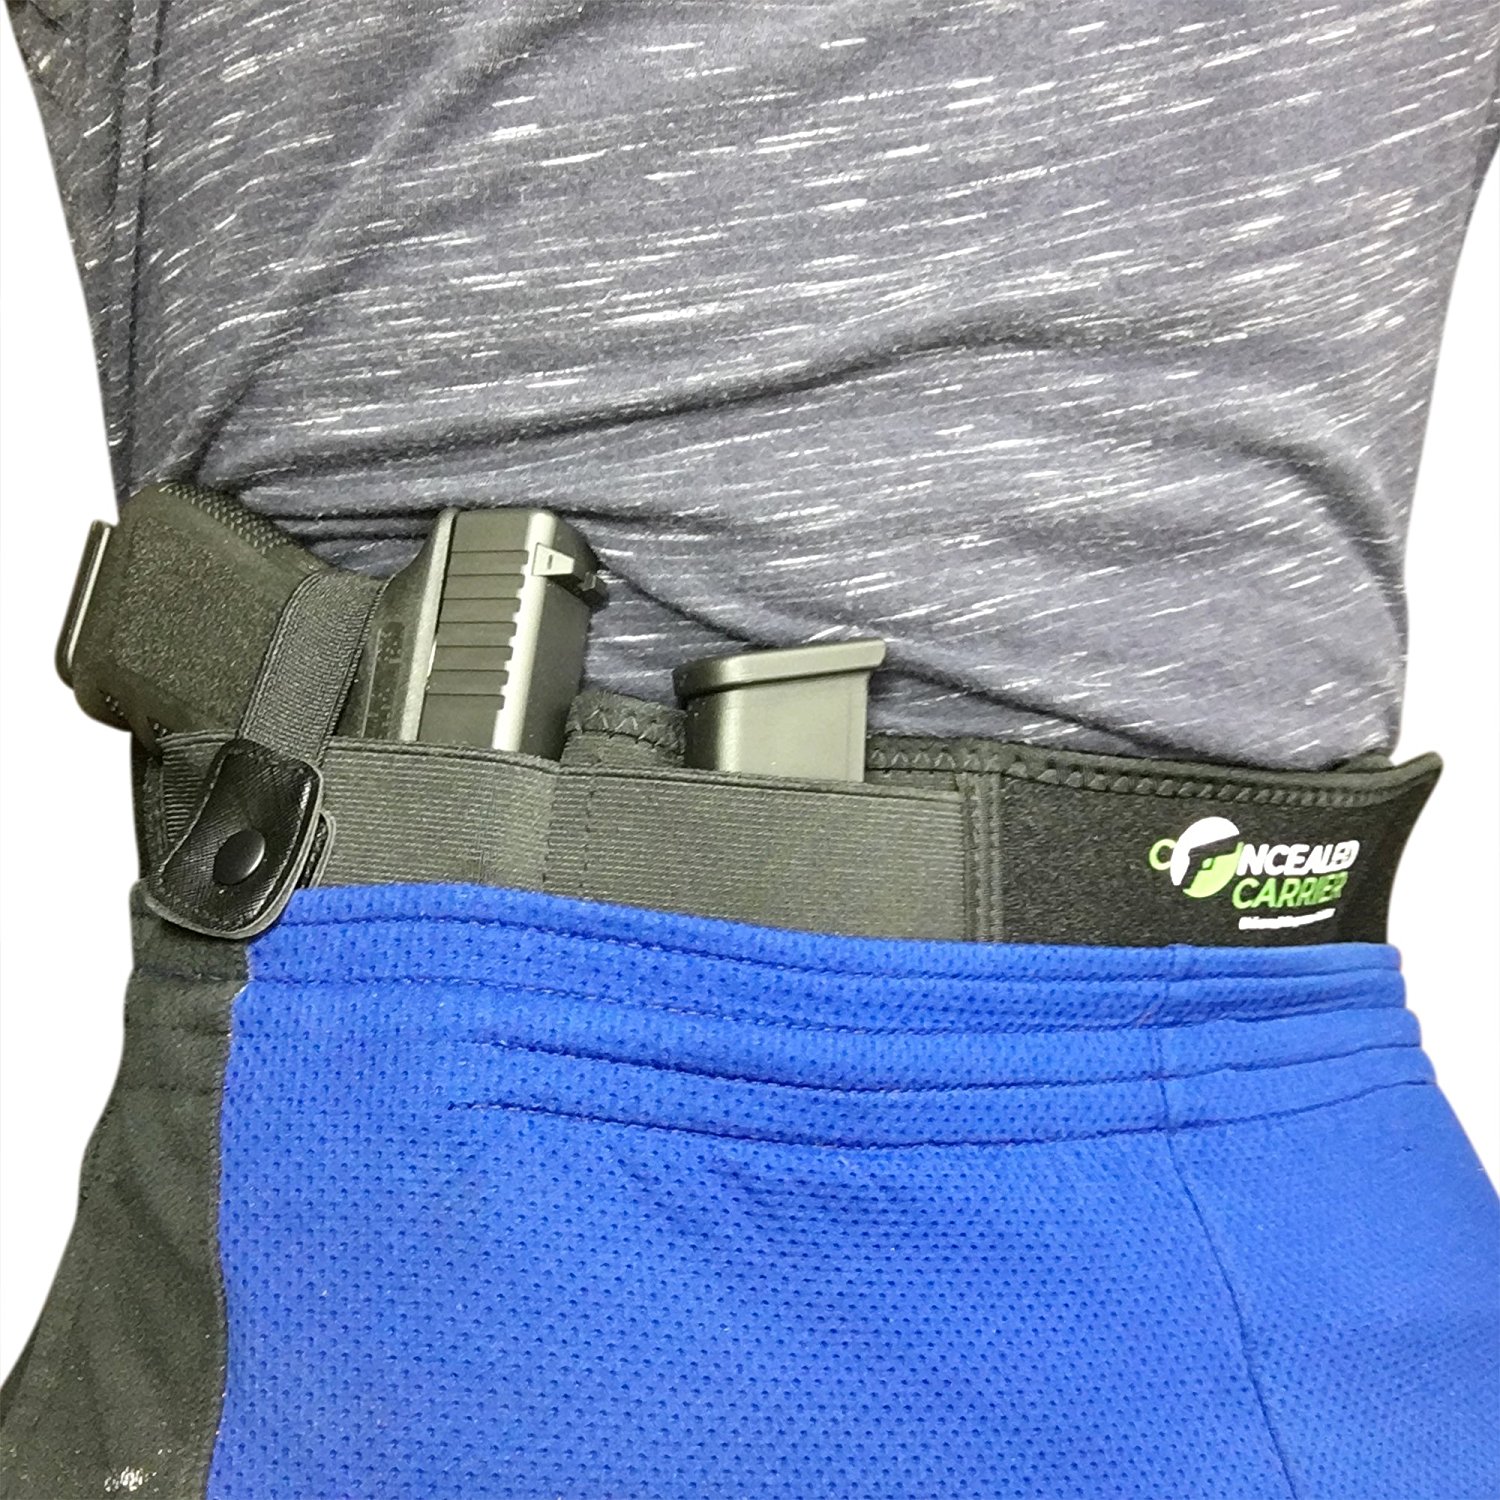 Man carrying a belly band holster